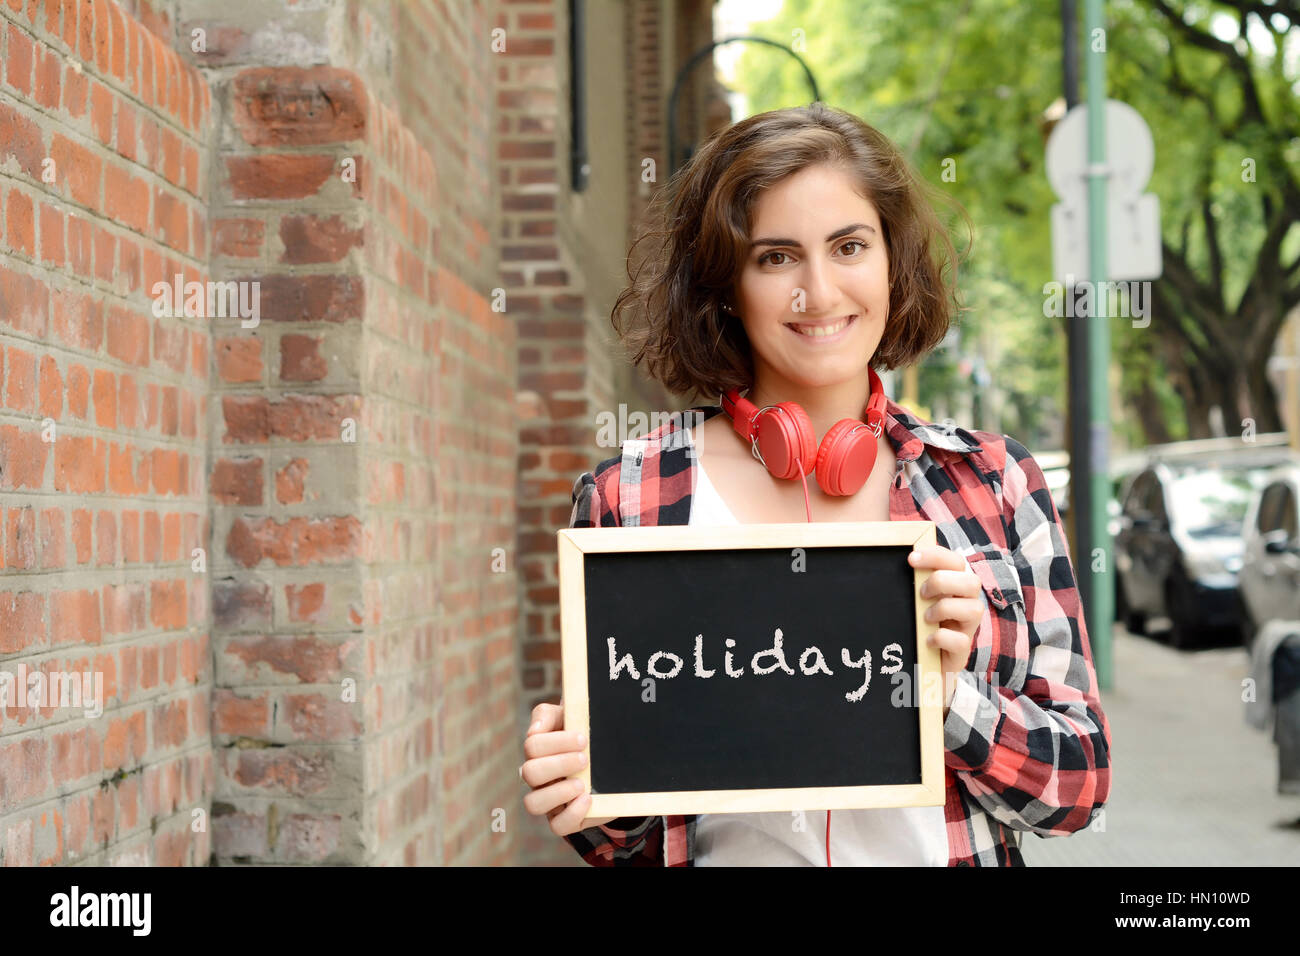 Young beautiful woman holding chalkboard with text 'Holidays'. Outdoors. Stock Photo